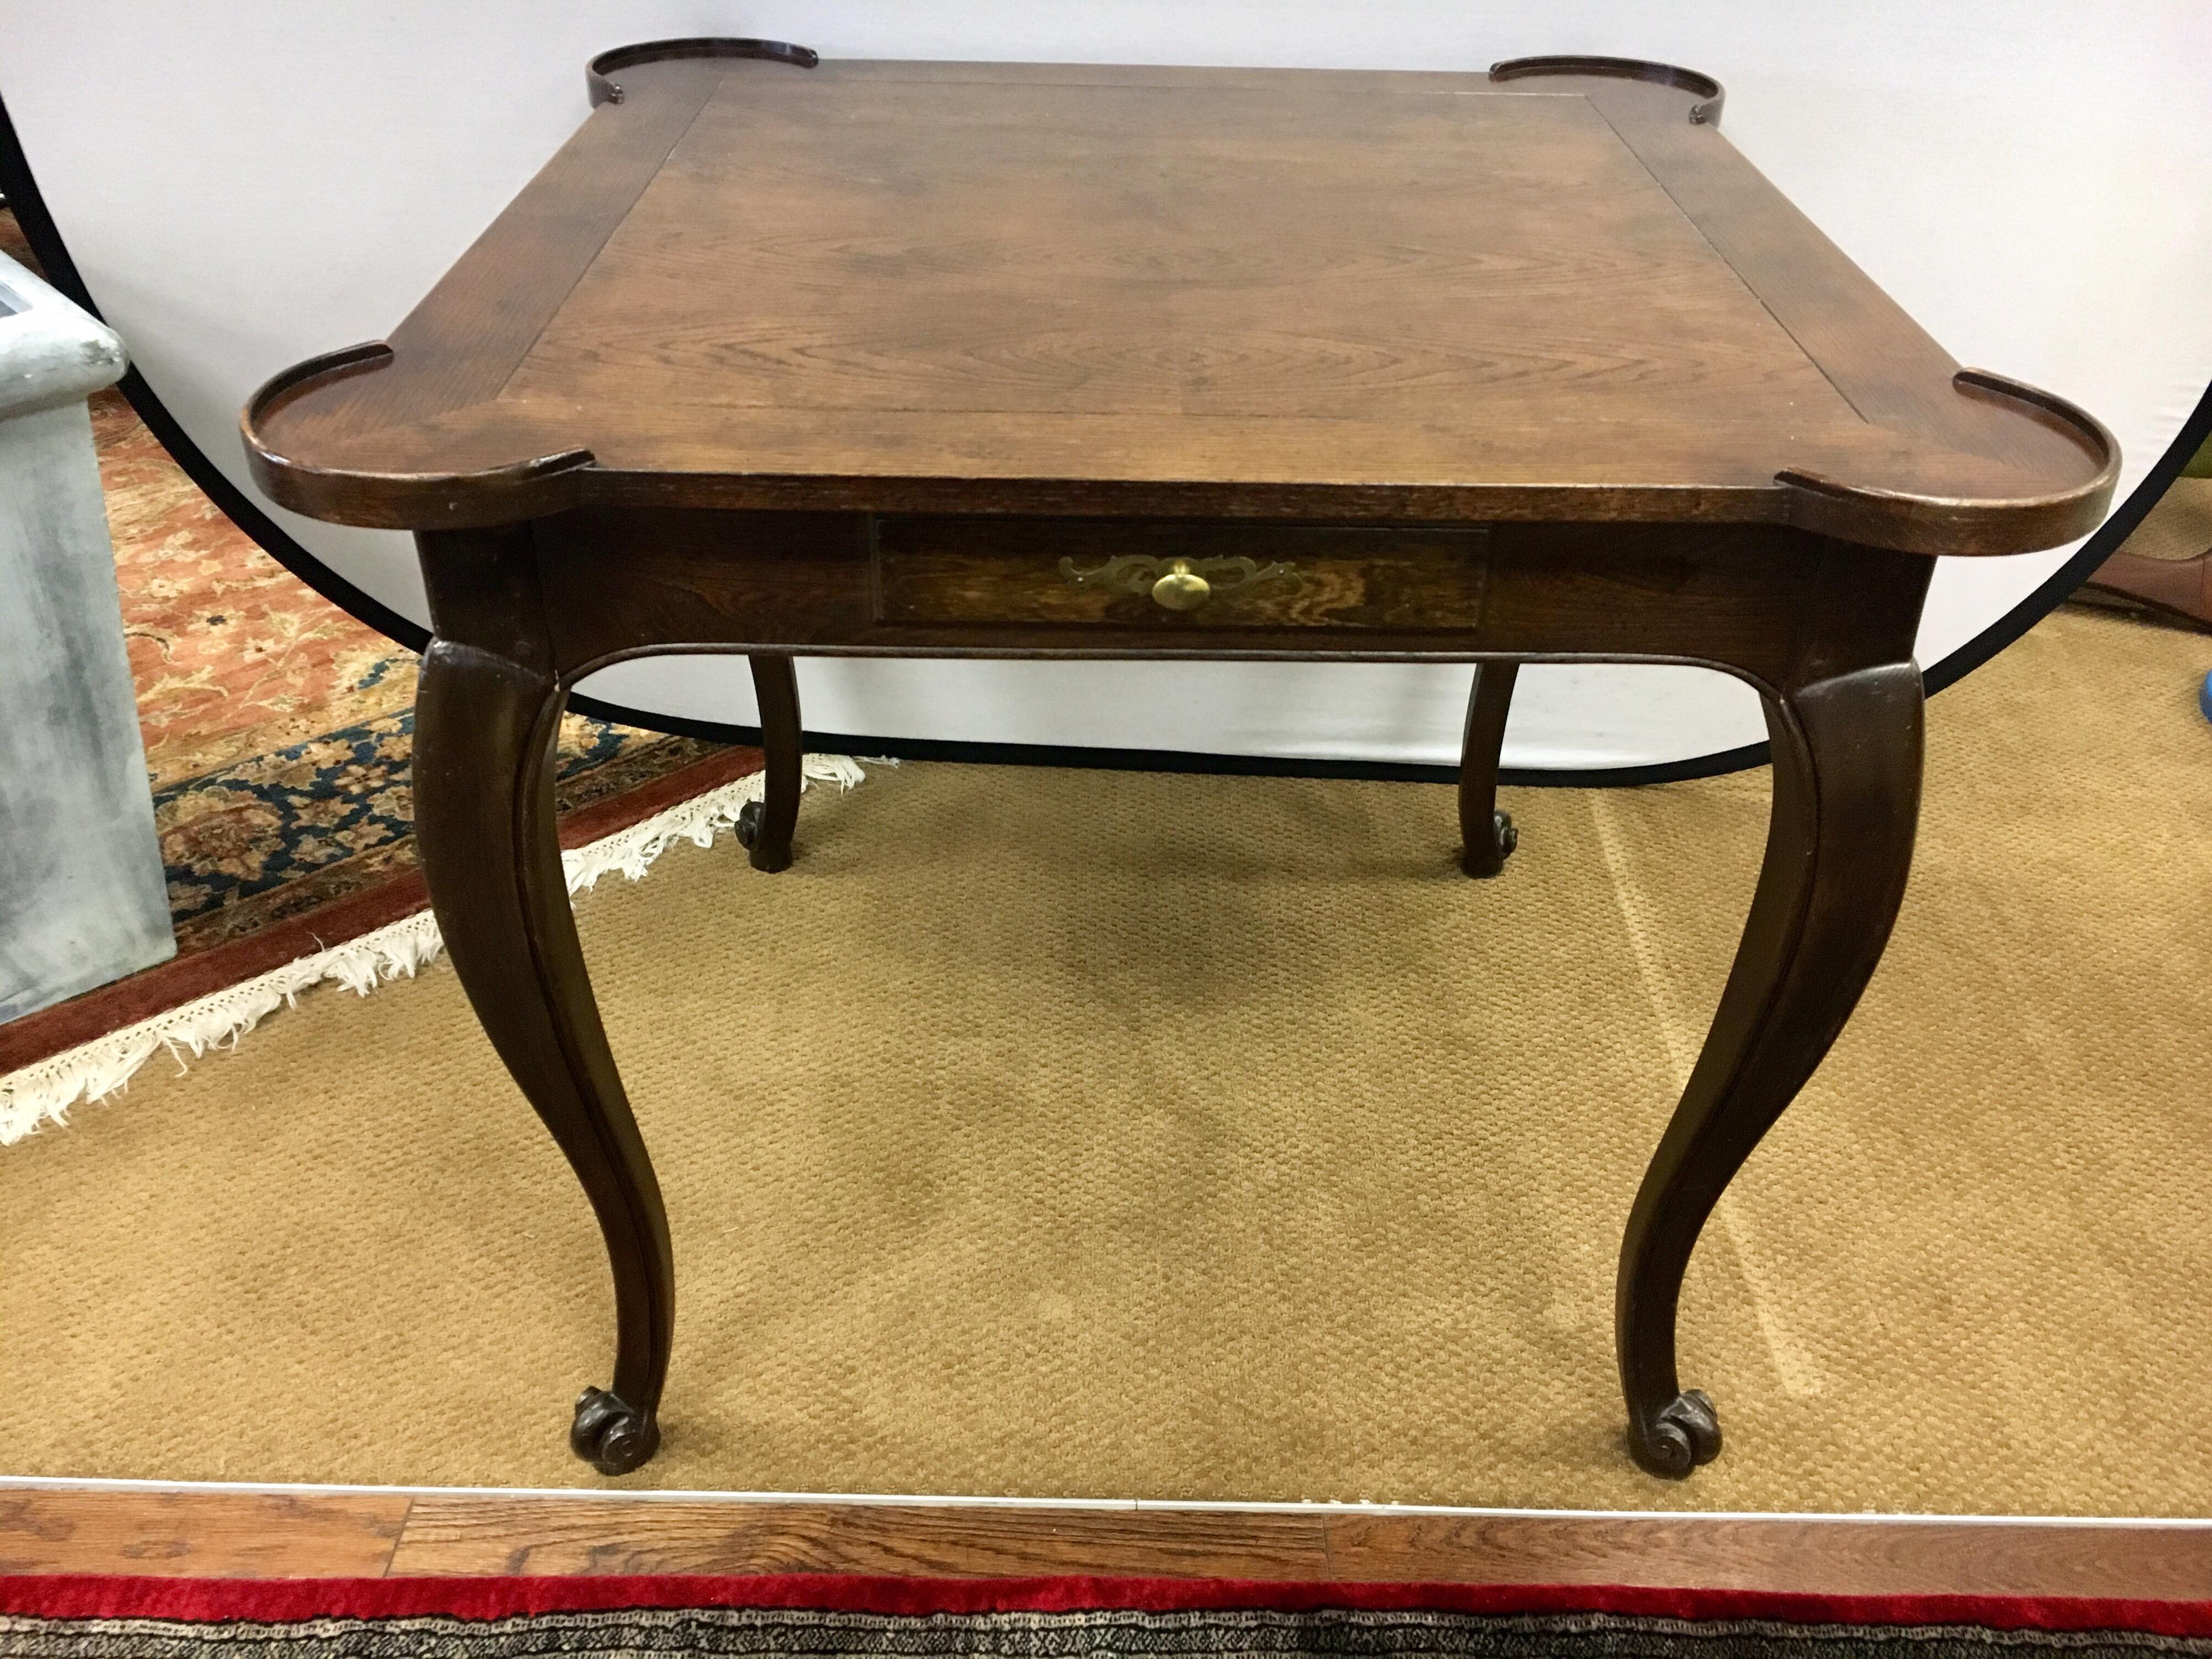 Signed Baker furniture dark walnut game table with one drawer for storing game pieces or cards. Each corner has a rounded area with a raised lip for cups.